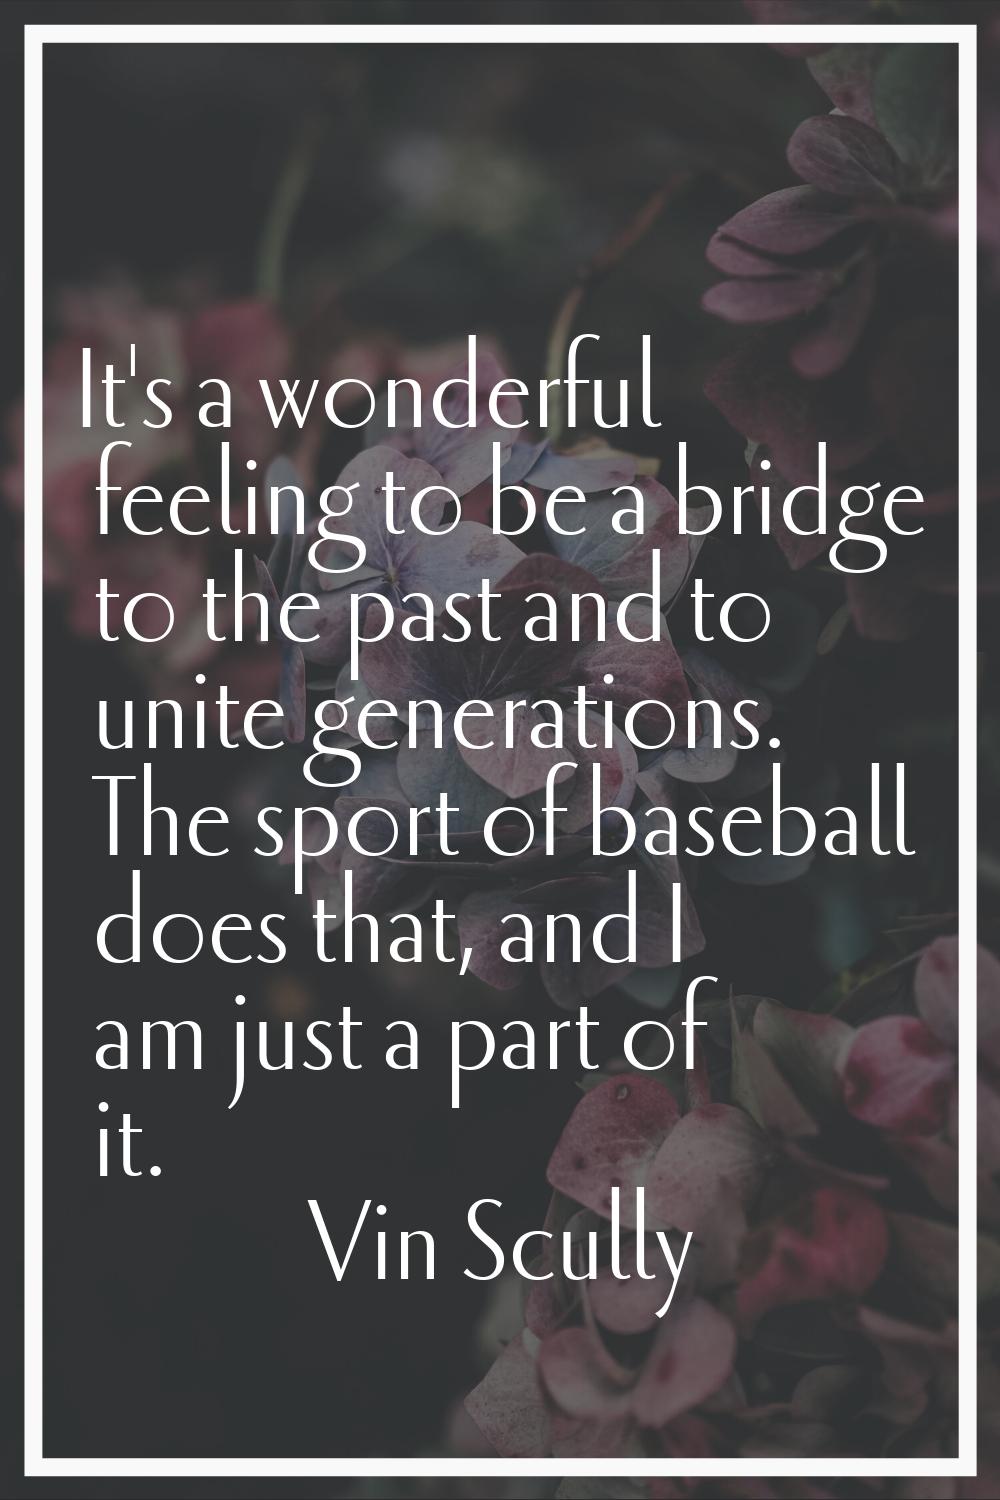 It's a wonderful feeling to be a bridge to the past and to unite generations. The sport of baseball